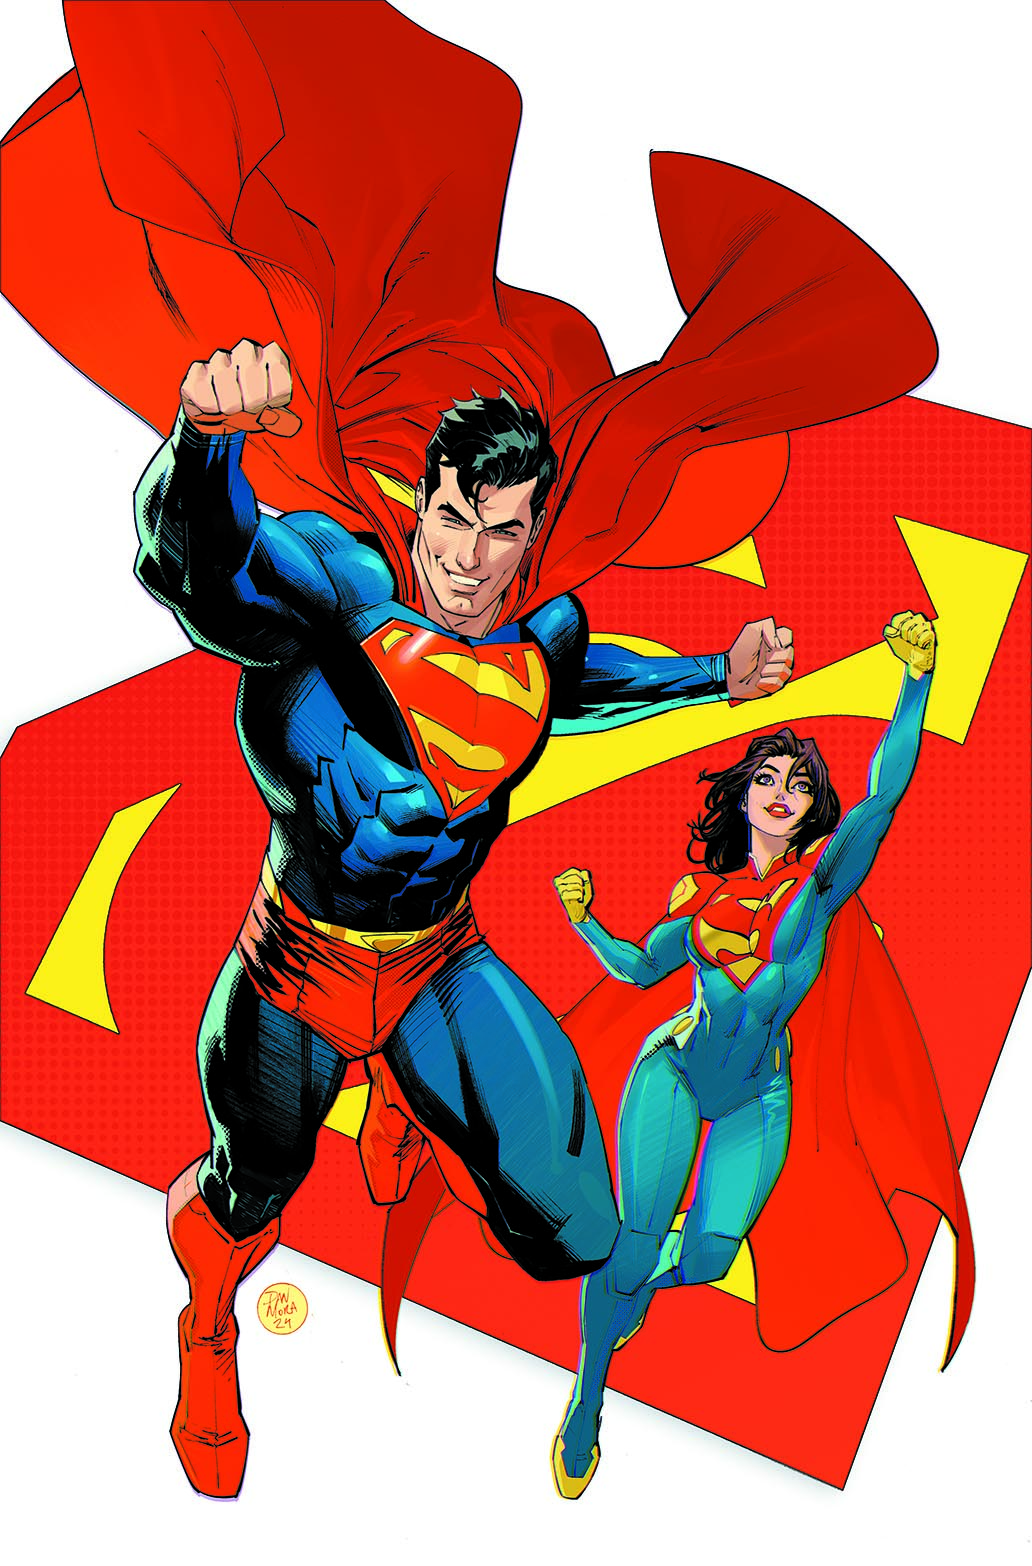 Cover for Superman #19